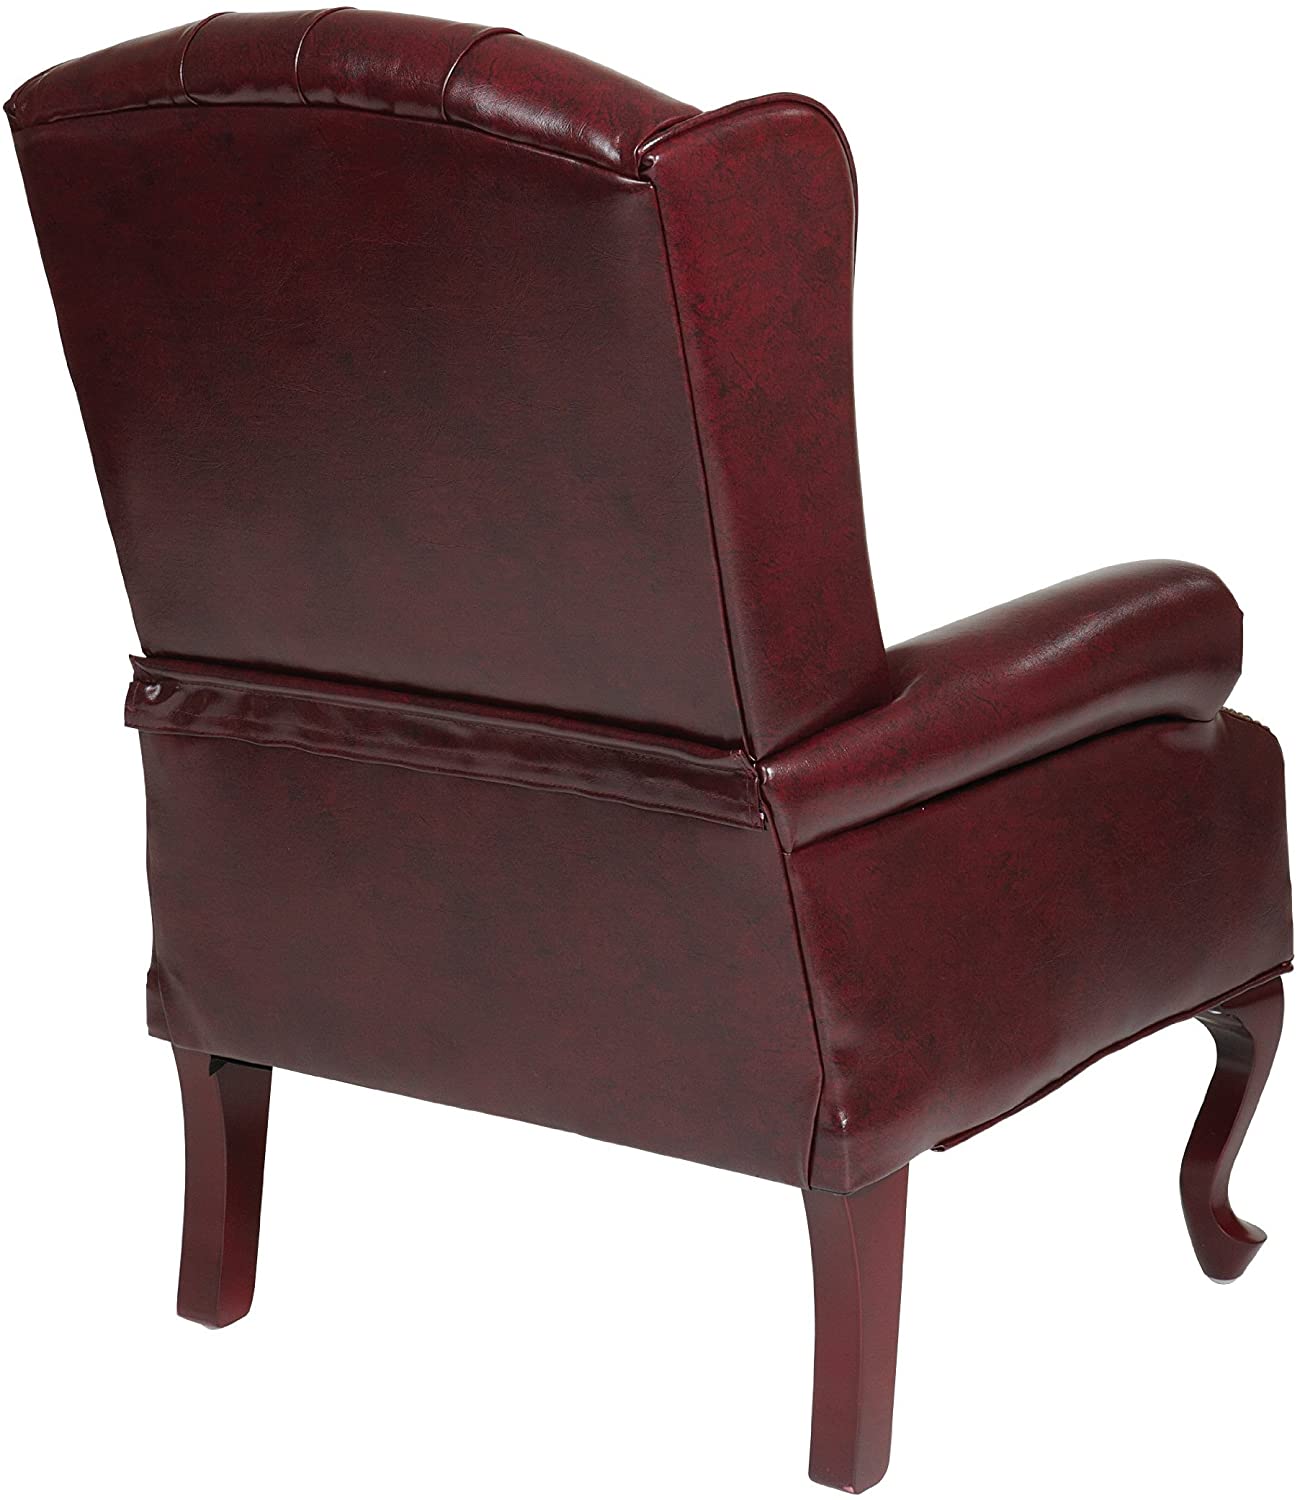 Tufted High Back Traditional Queen Anne Style Chair with Nailhead Accents and Mahogany Finish Legs